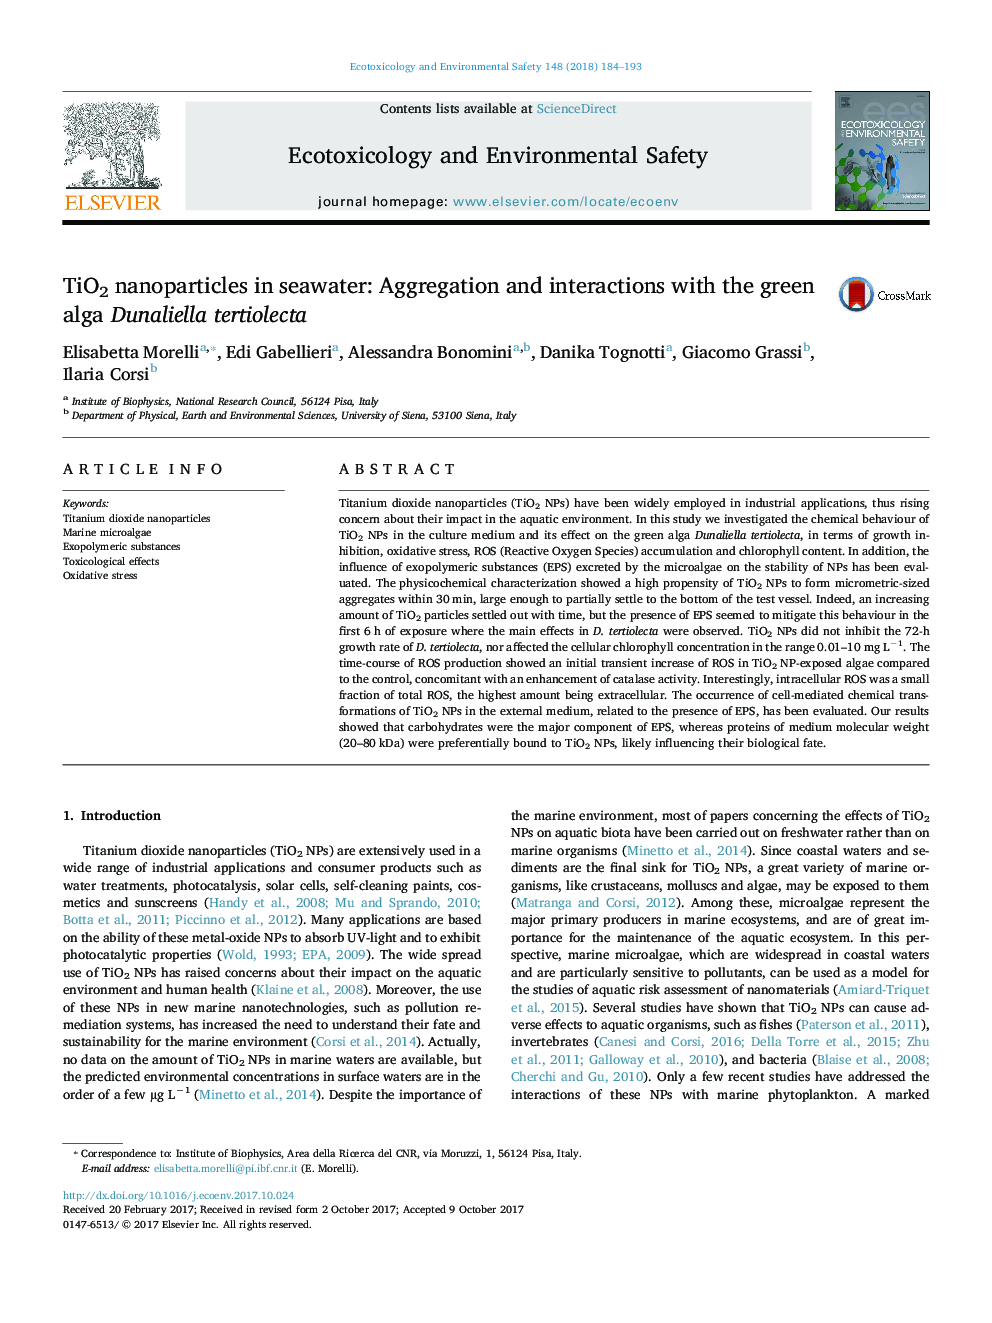 TiO2 nanoparticles in seawater: Aggregation and interactions with the green alga Dunaliella tertiolecta